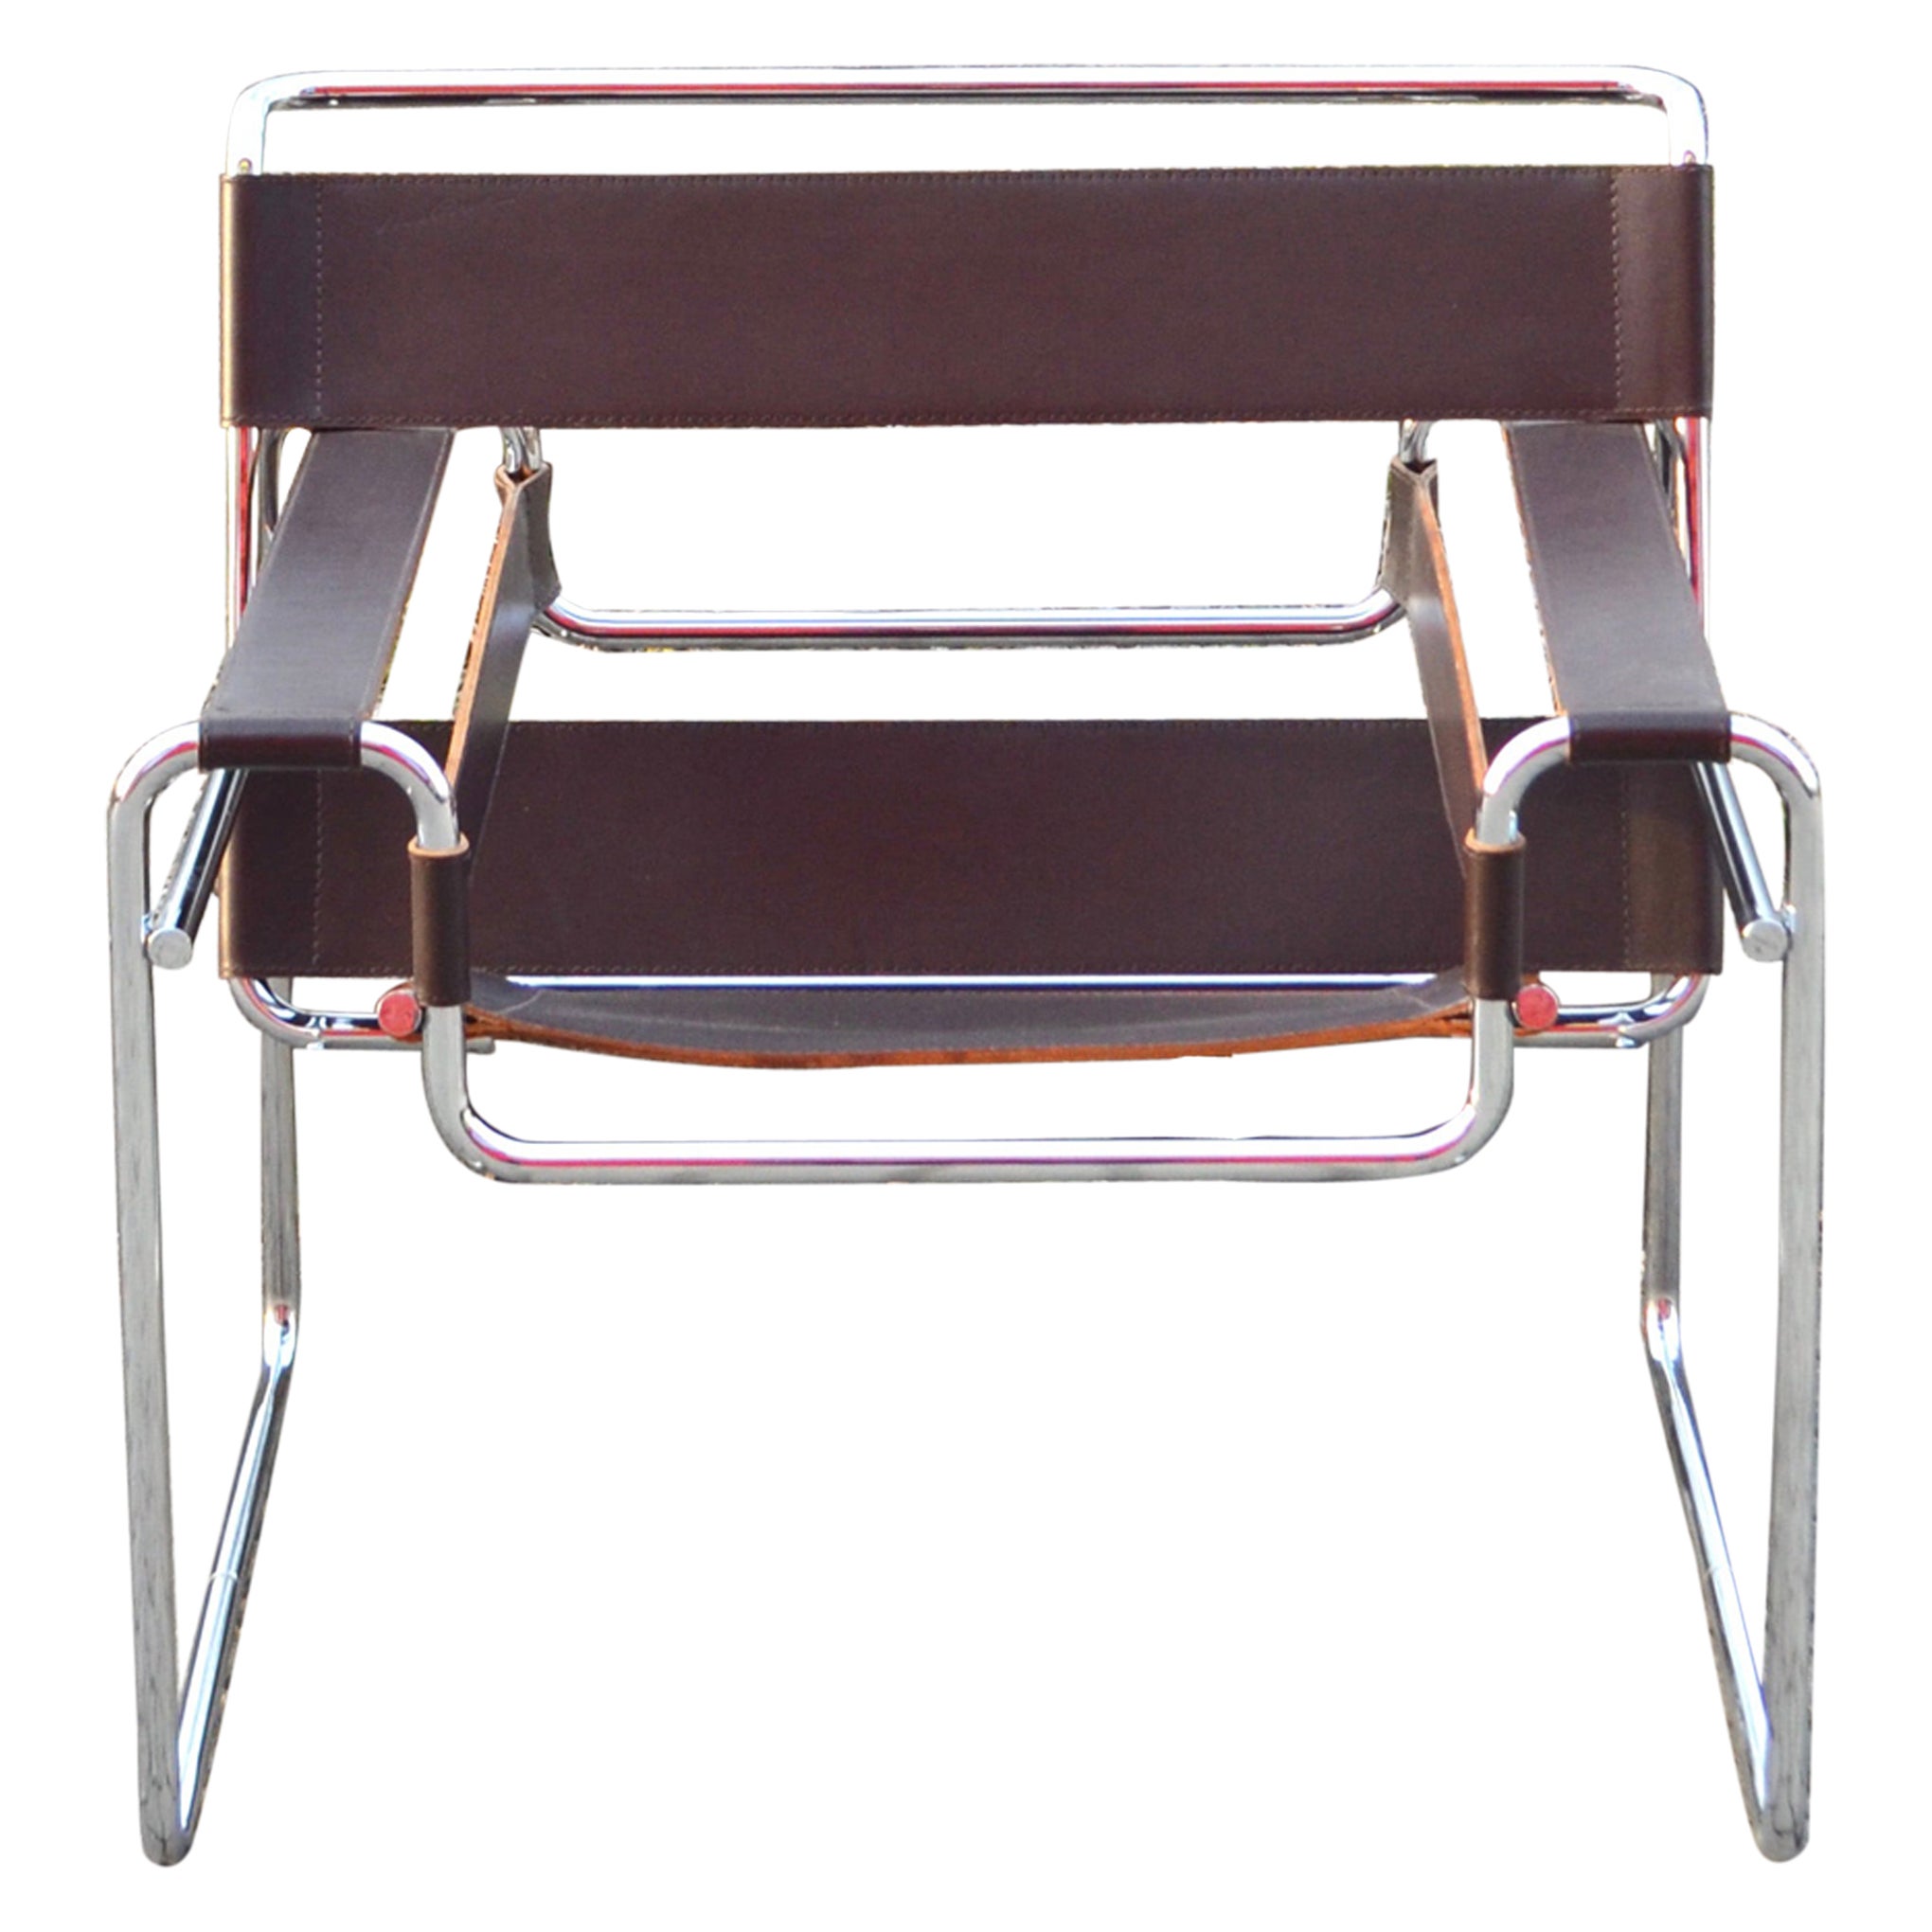 Knoll International Wassily Chair Design by Marcel Breuer Brown Saddle Leather 